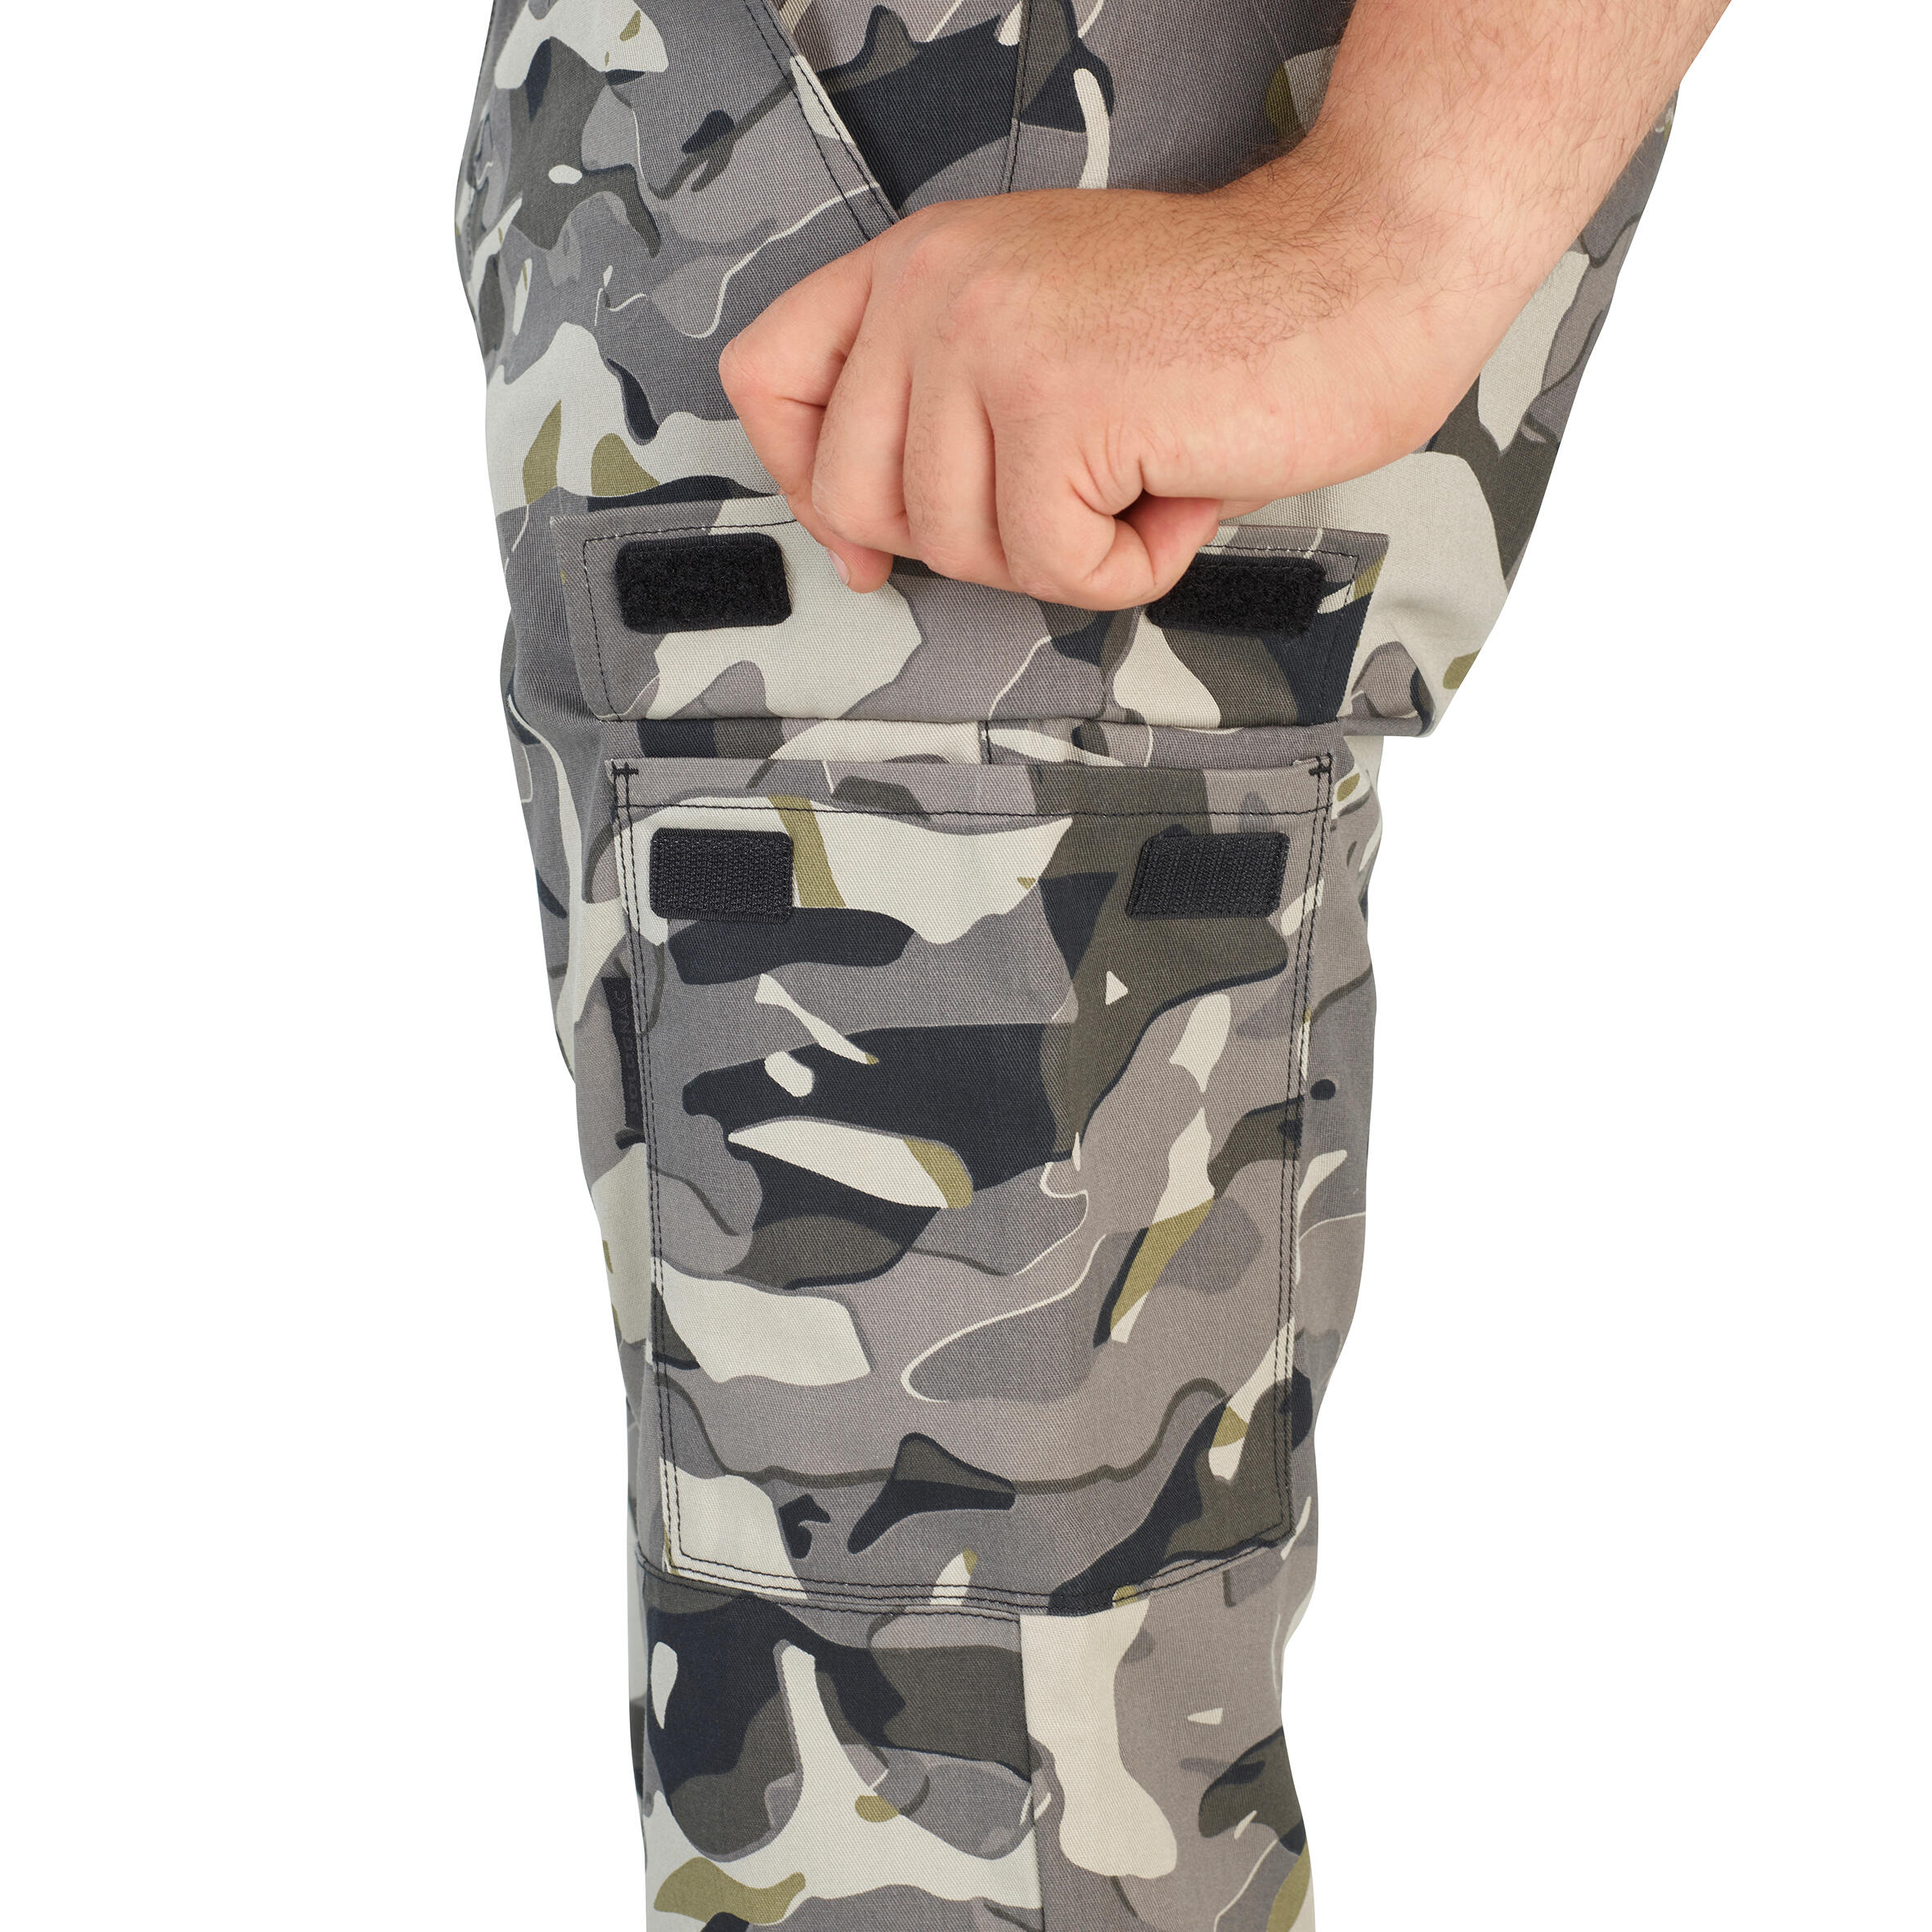 Buy Multi Pocket Military Style Army Camouflage Men's Cargo Pants (32,  Black) at Amazon.in